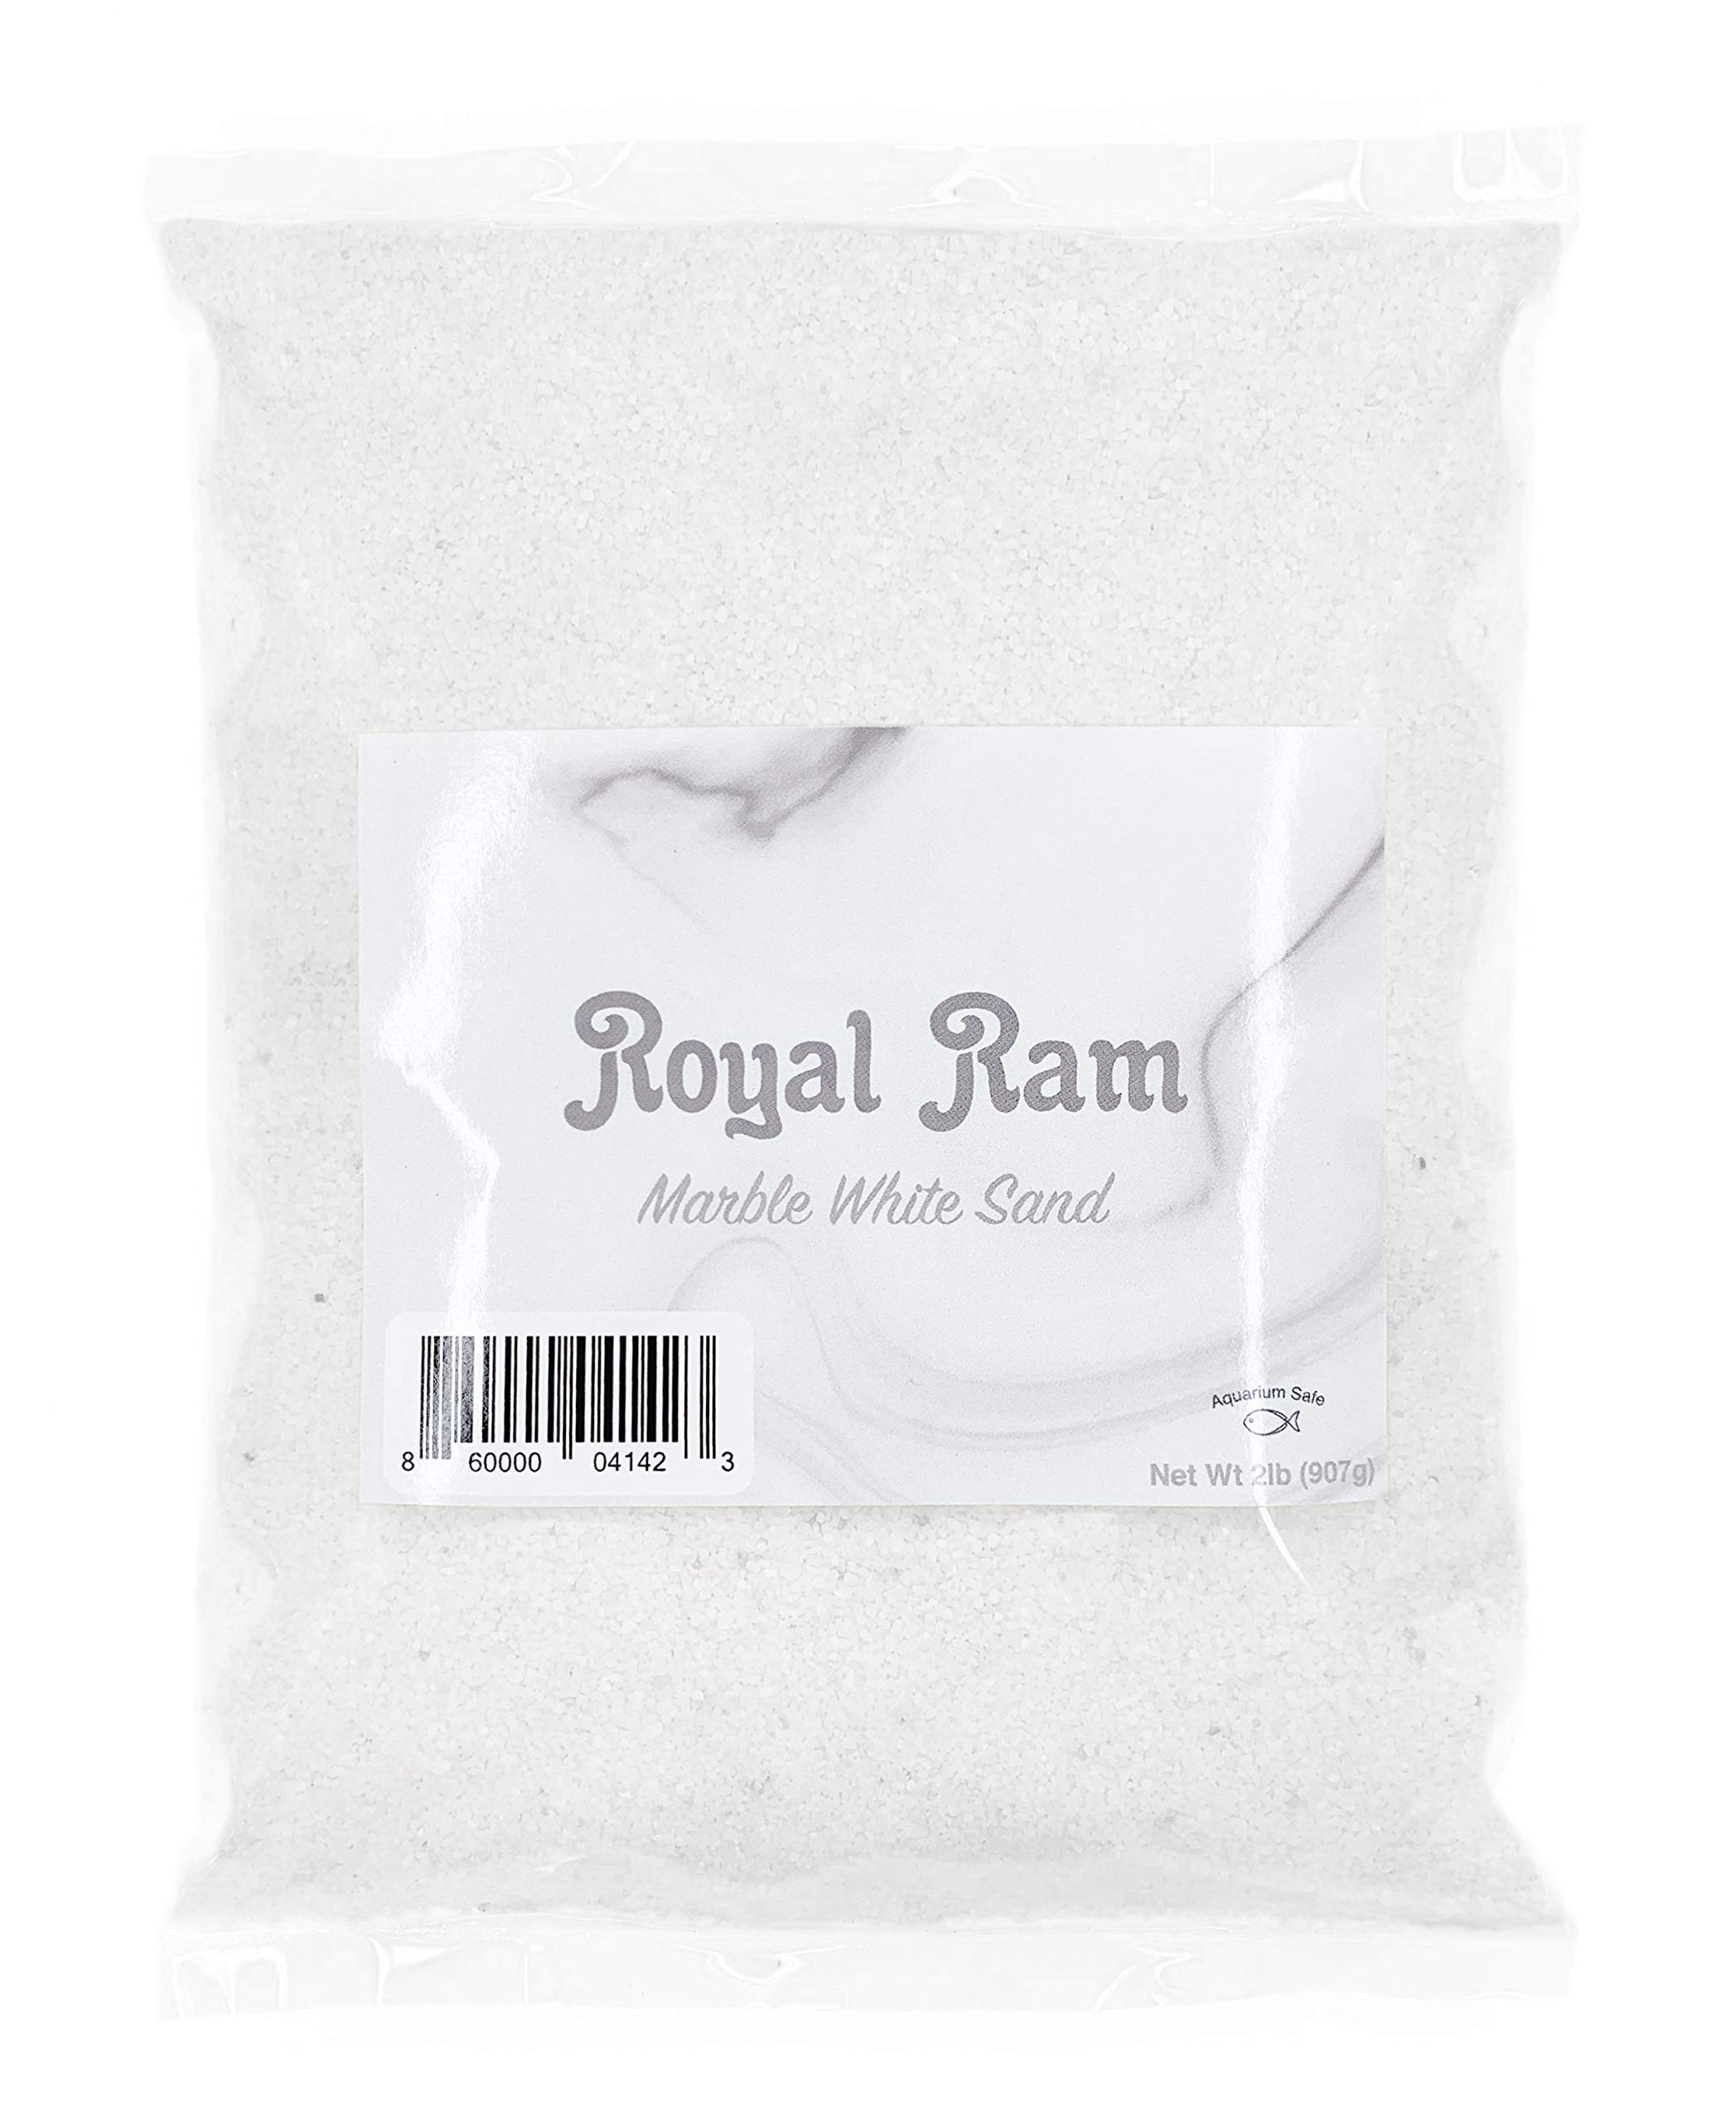 Royal Ram: 2lb Natural White Marble Sand – Perfect for Interior Decor, Crafts, Aquariums